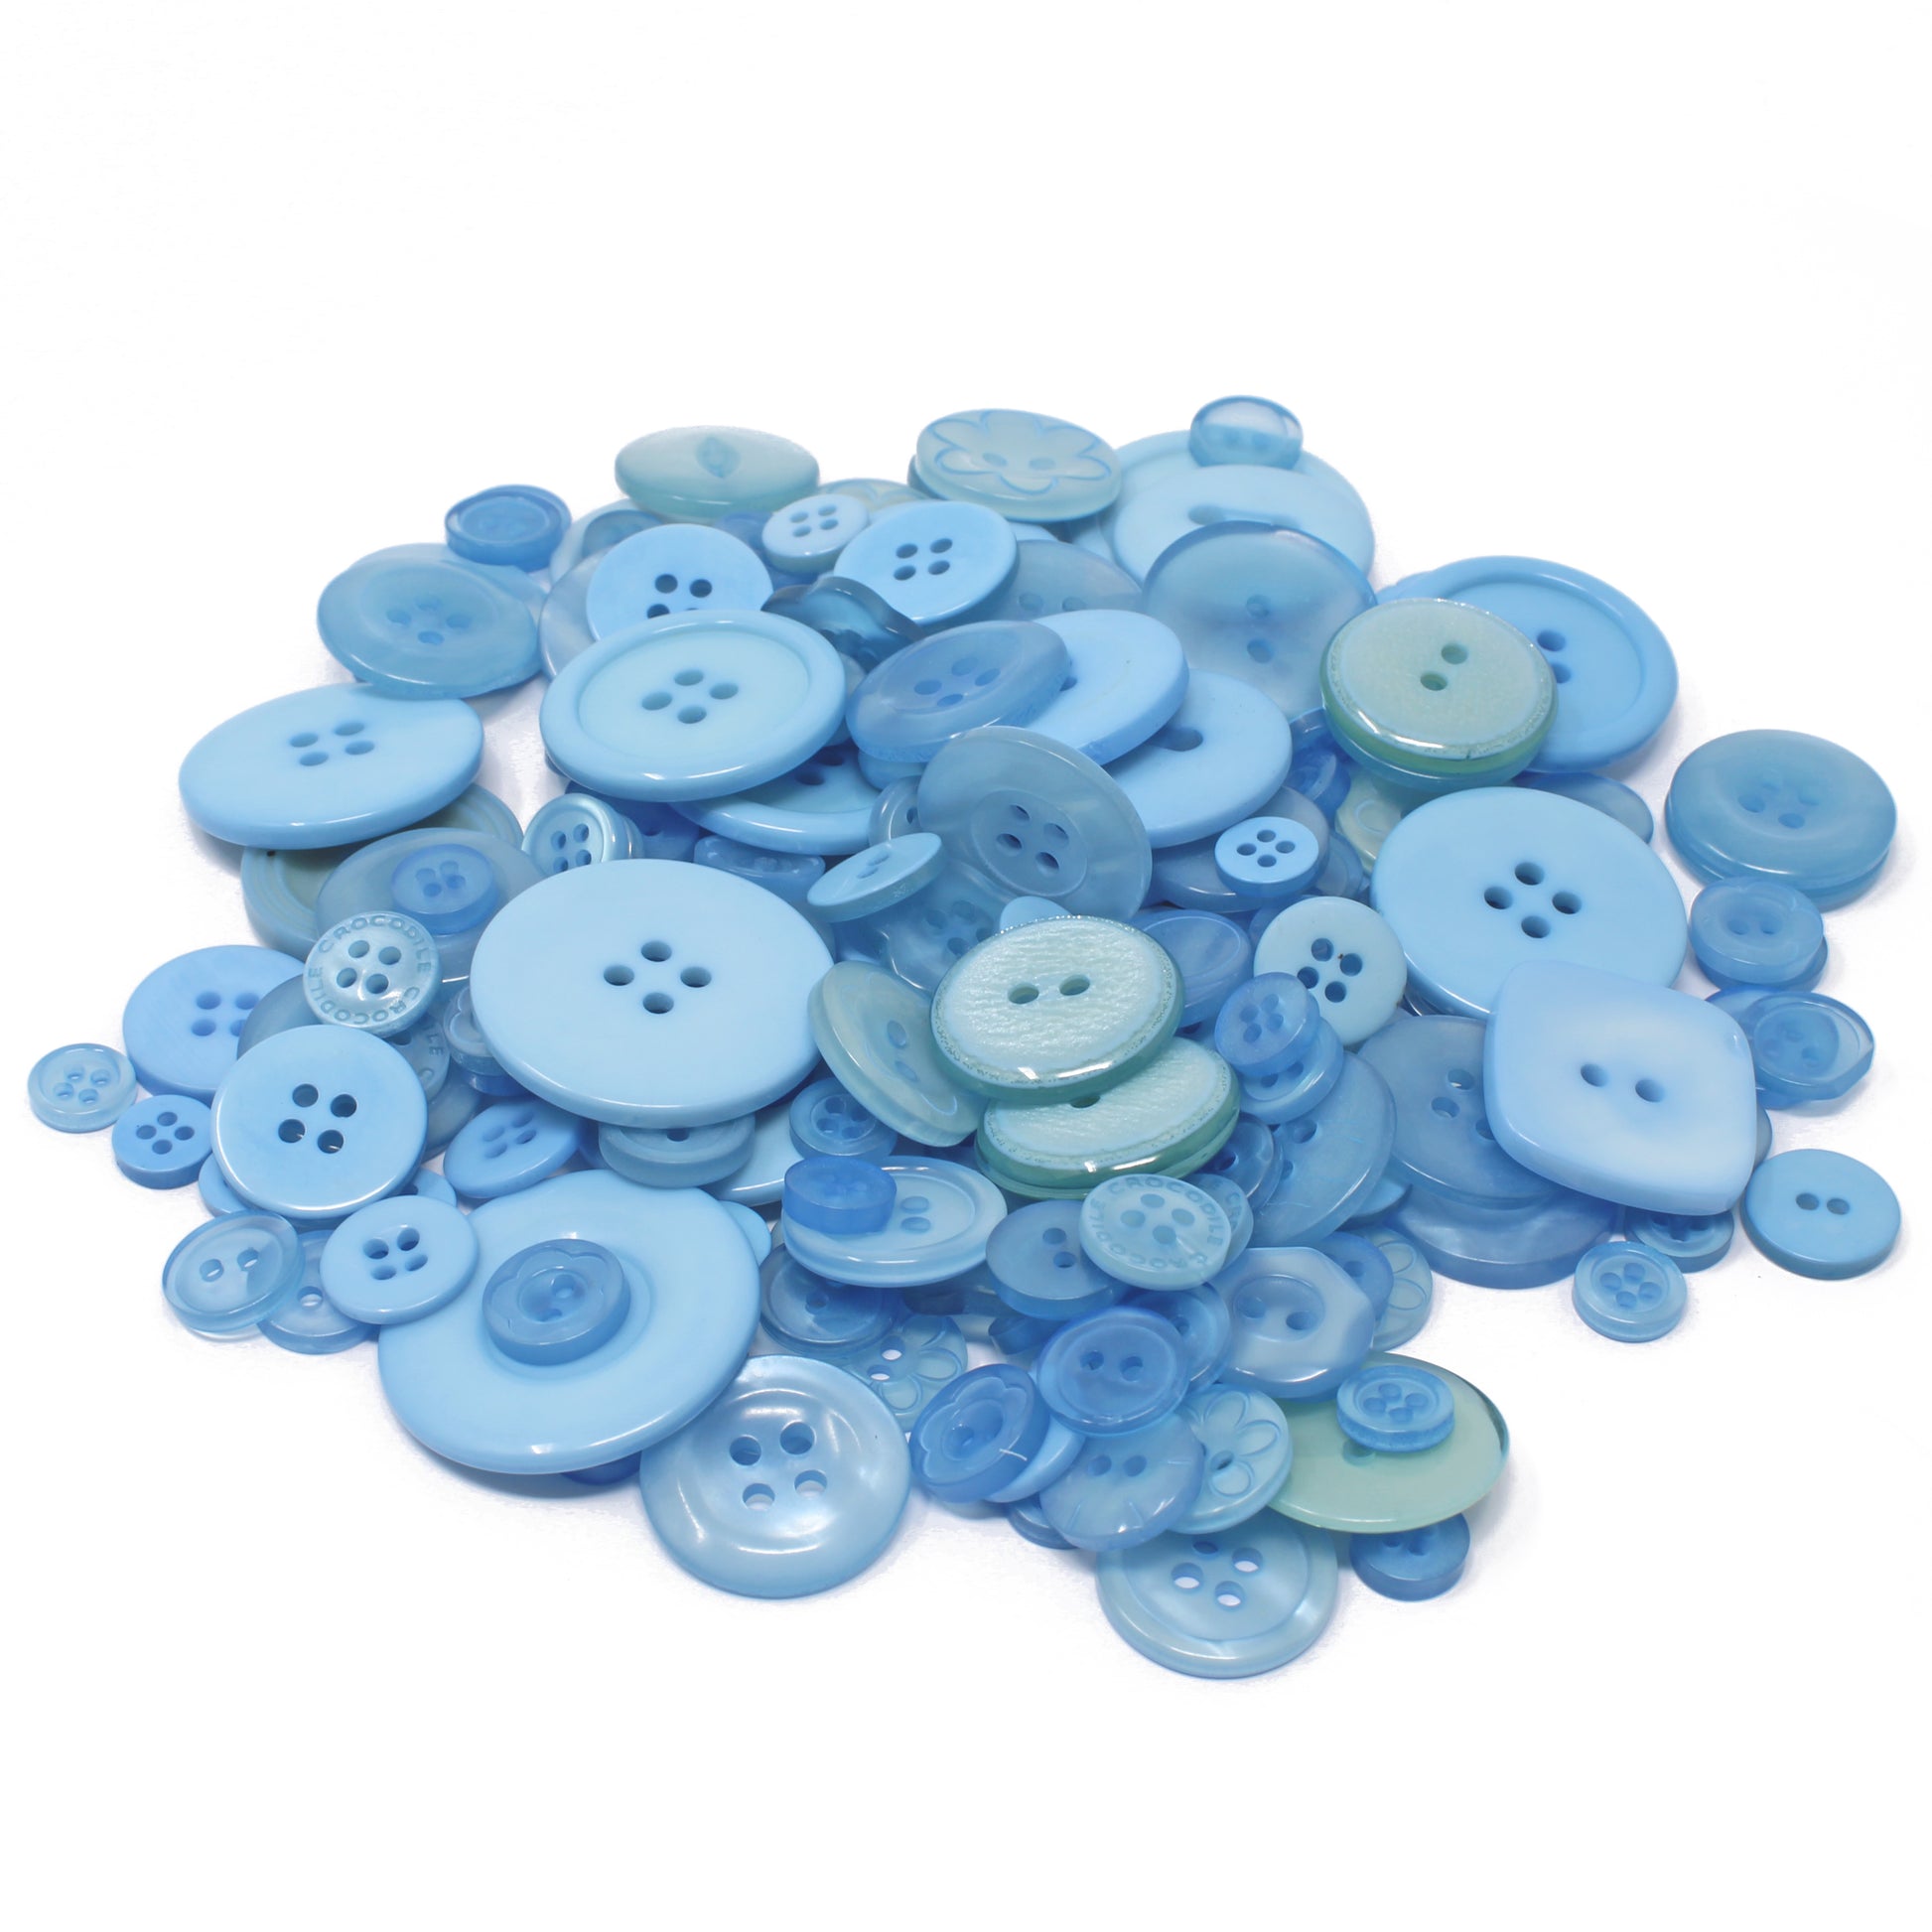 Blue 100g Bags Of Mix Acrylic & Resin Buttons